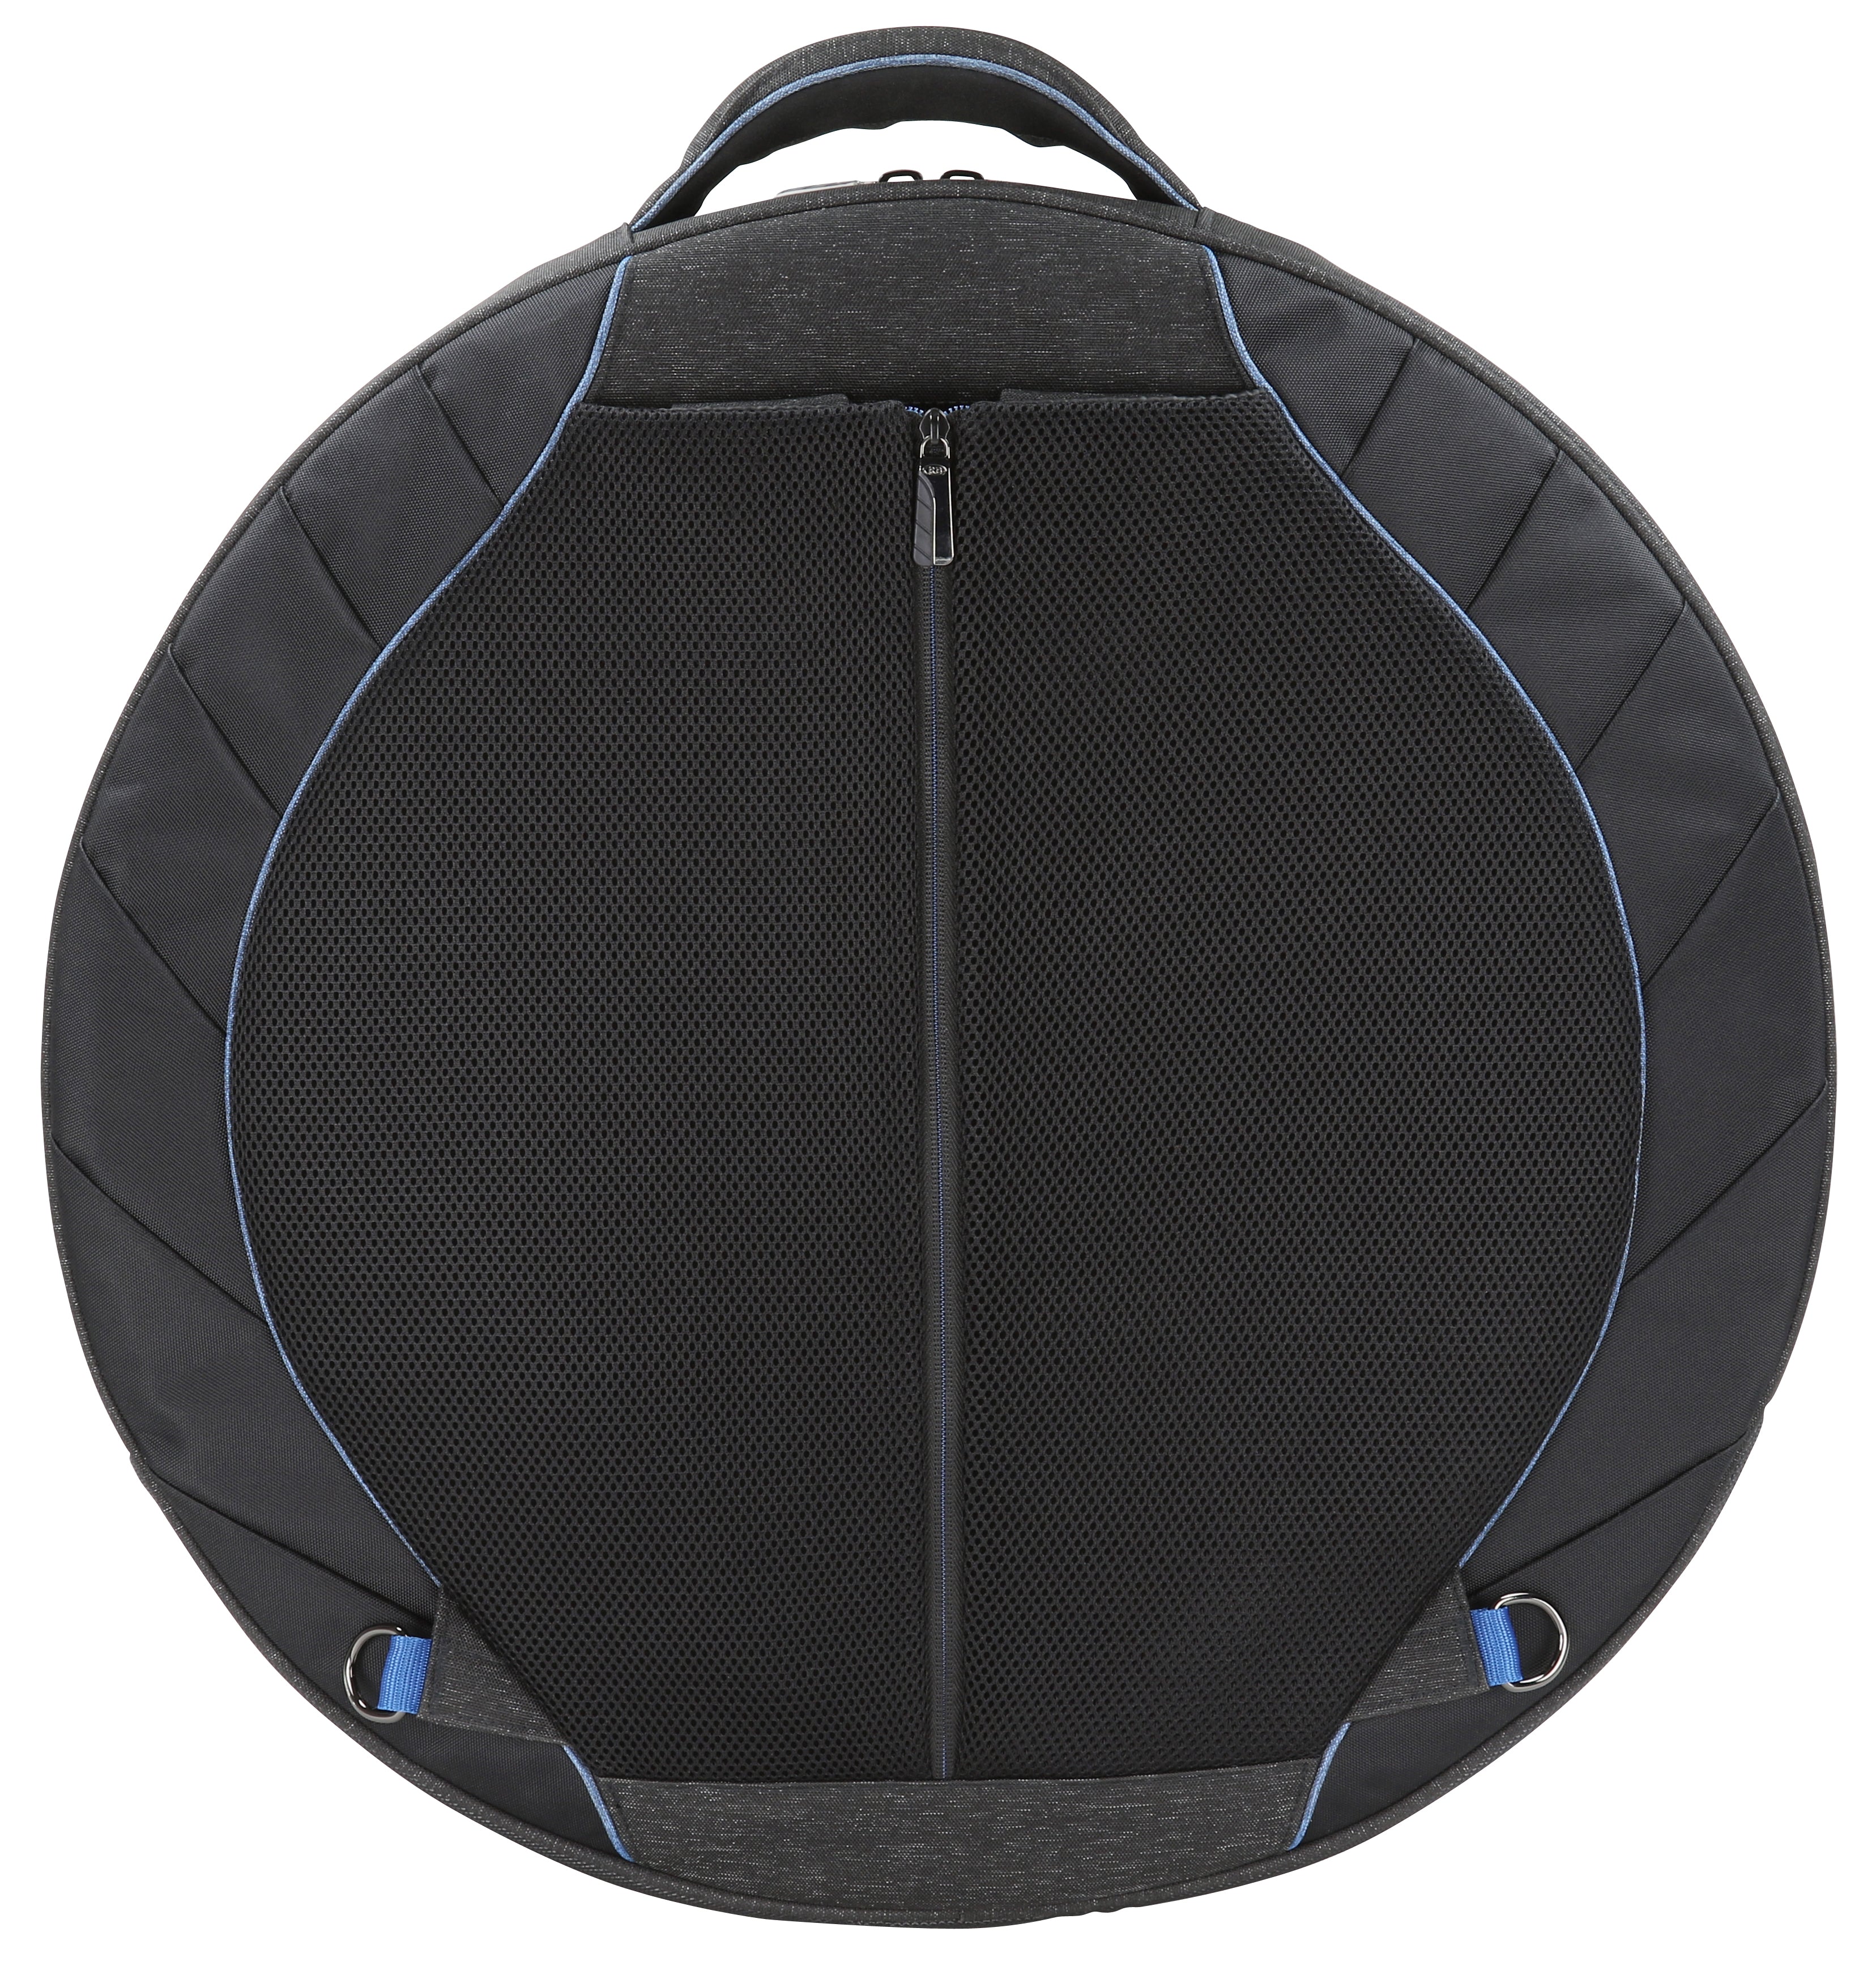 RB Continental Voyager Cymbal Case - Back